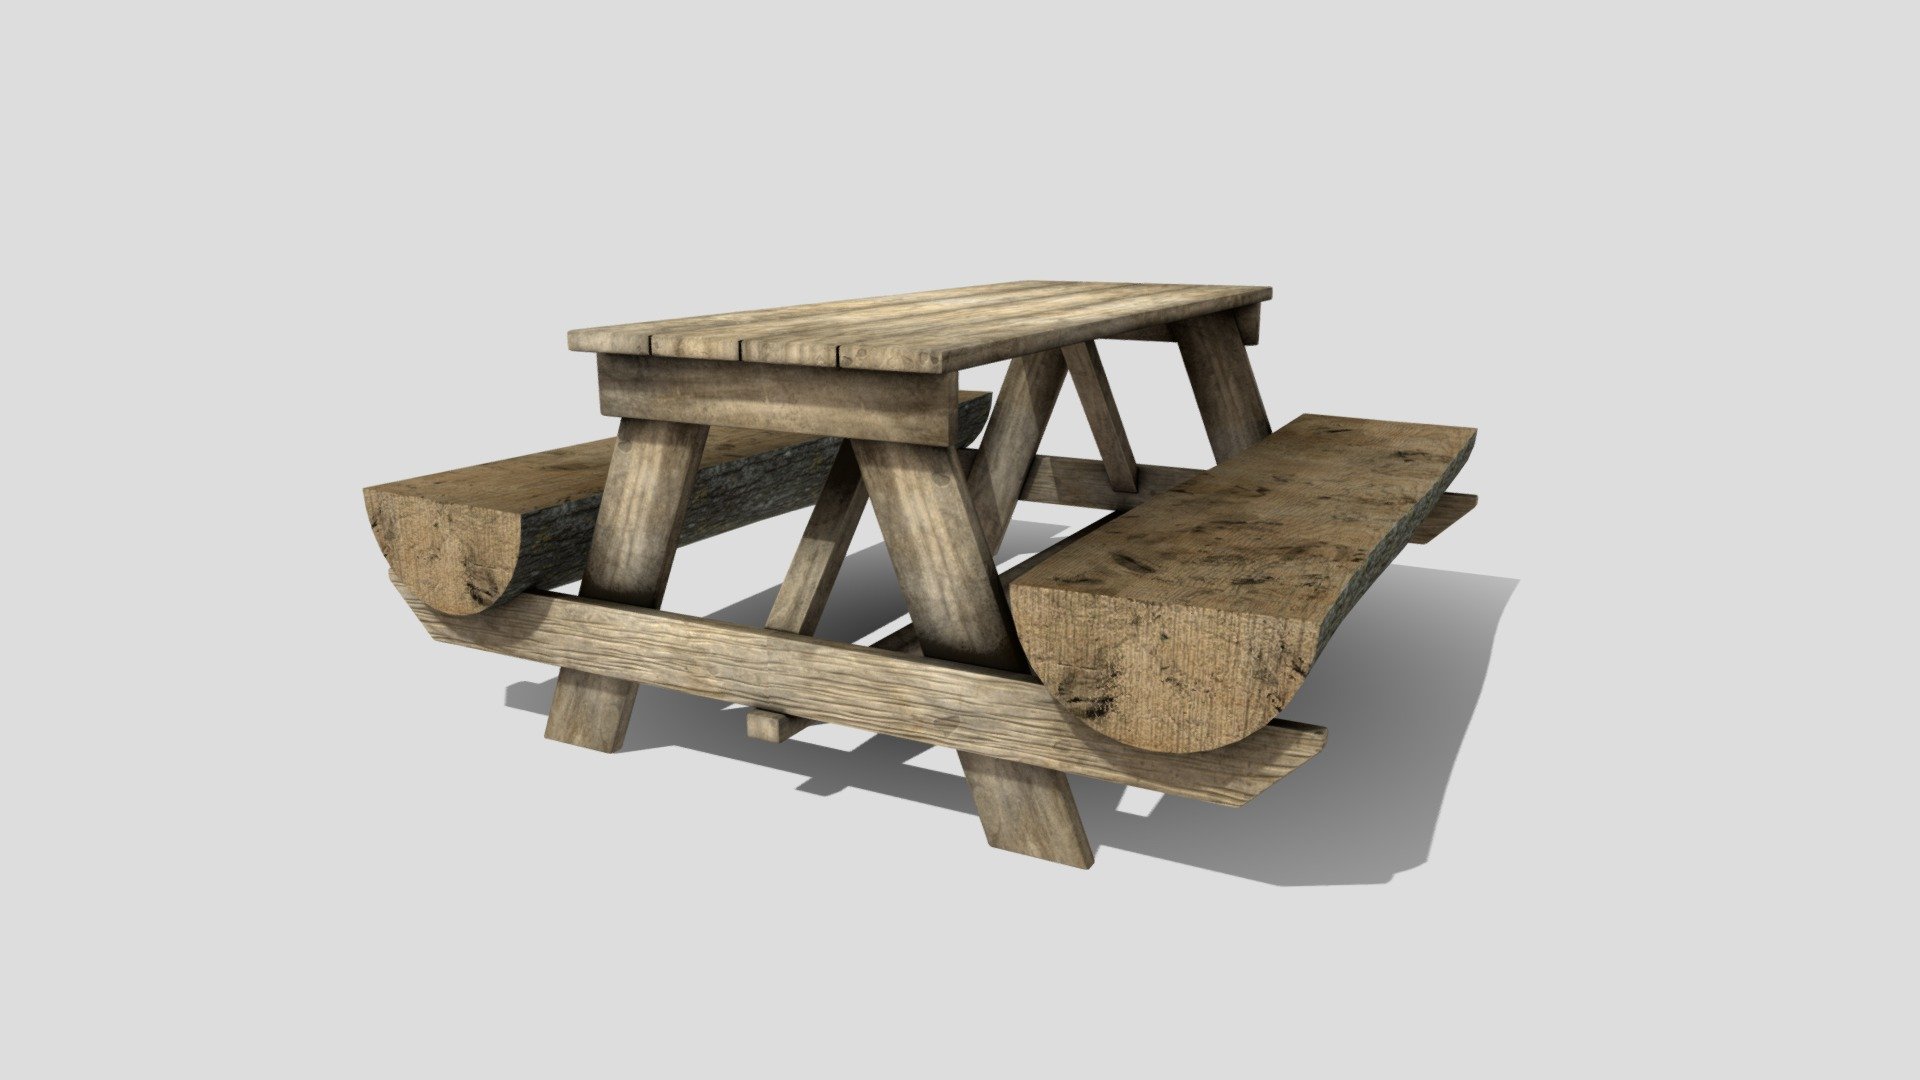 It is an outdoor table made of natural wood and can be used in various places such as gardens, outdoor cafes, and camping sites 3d model